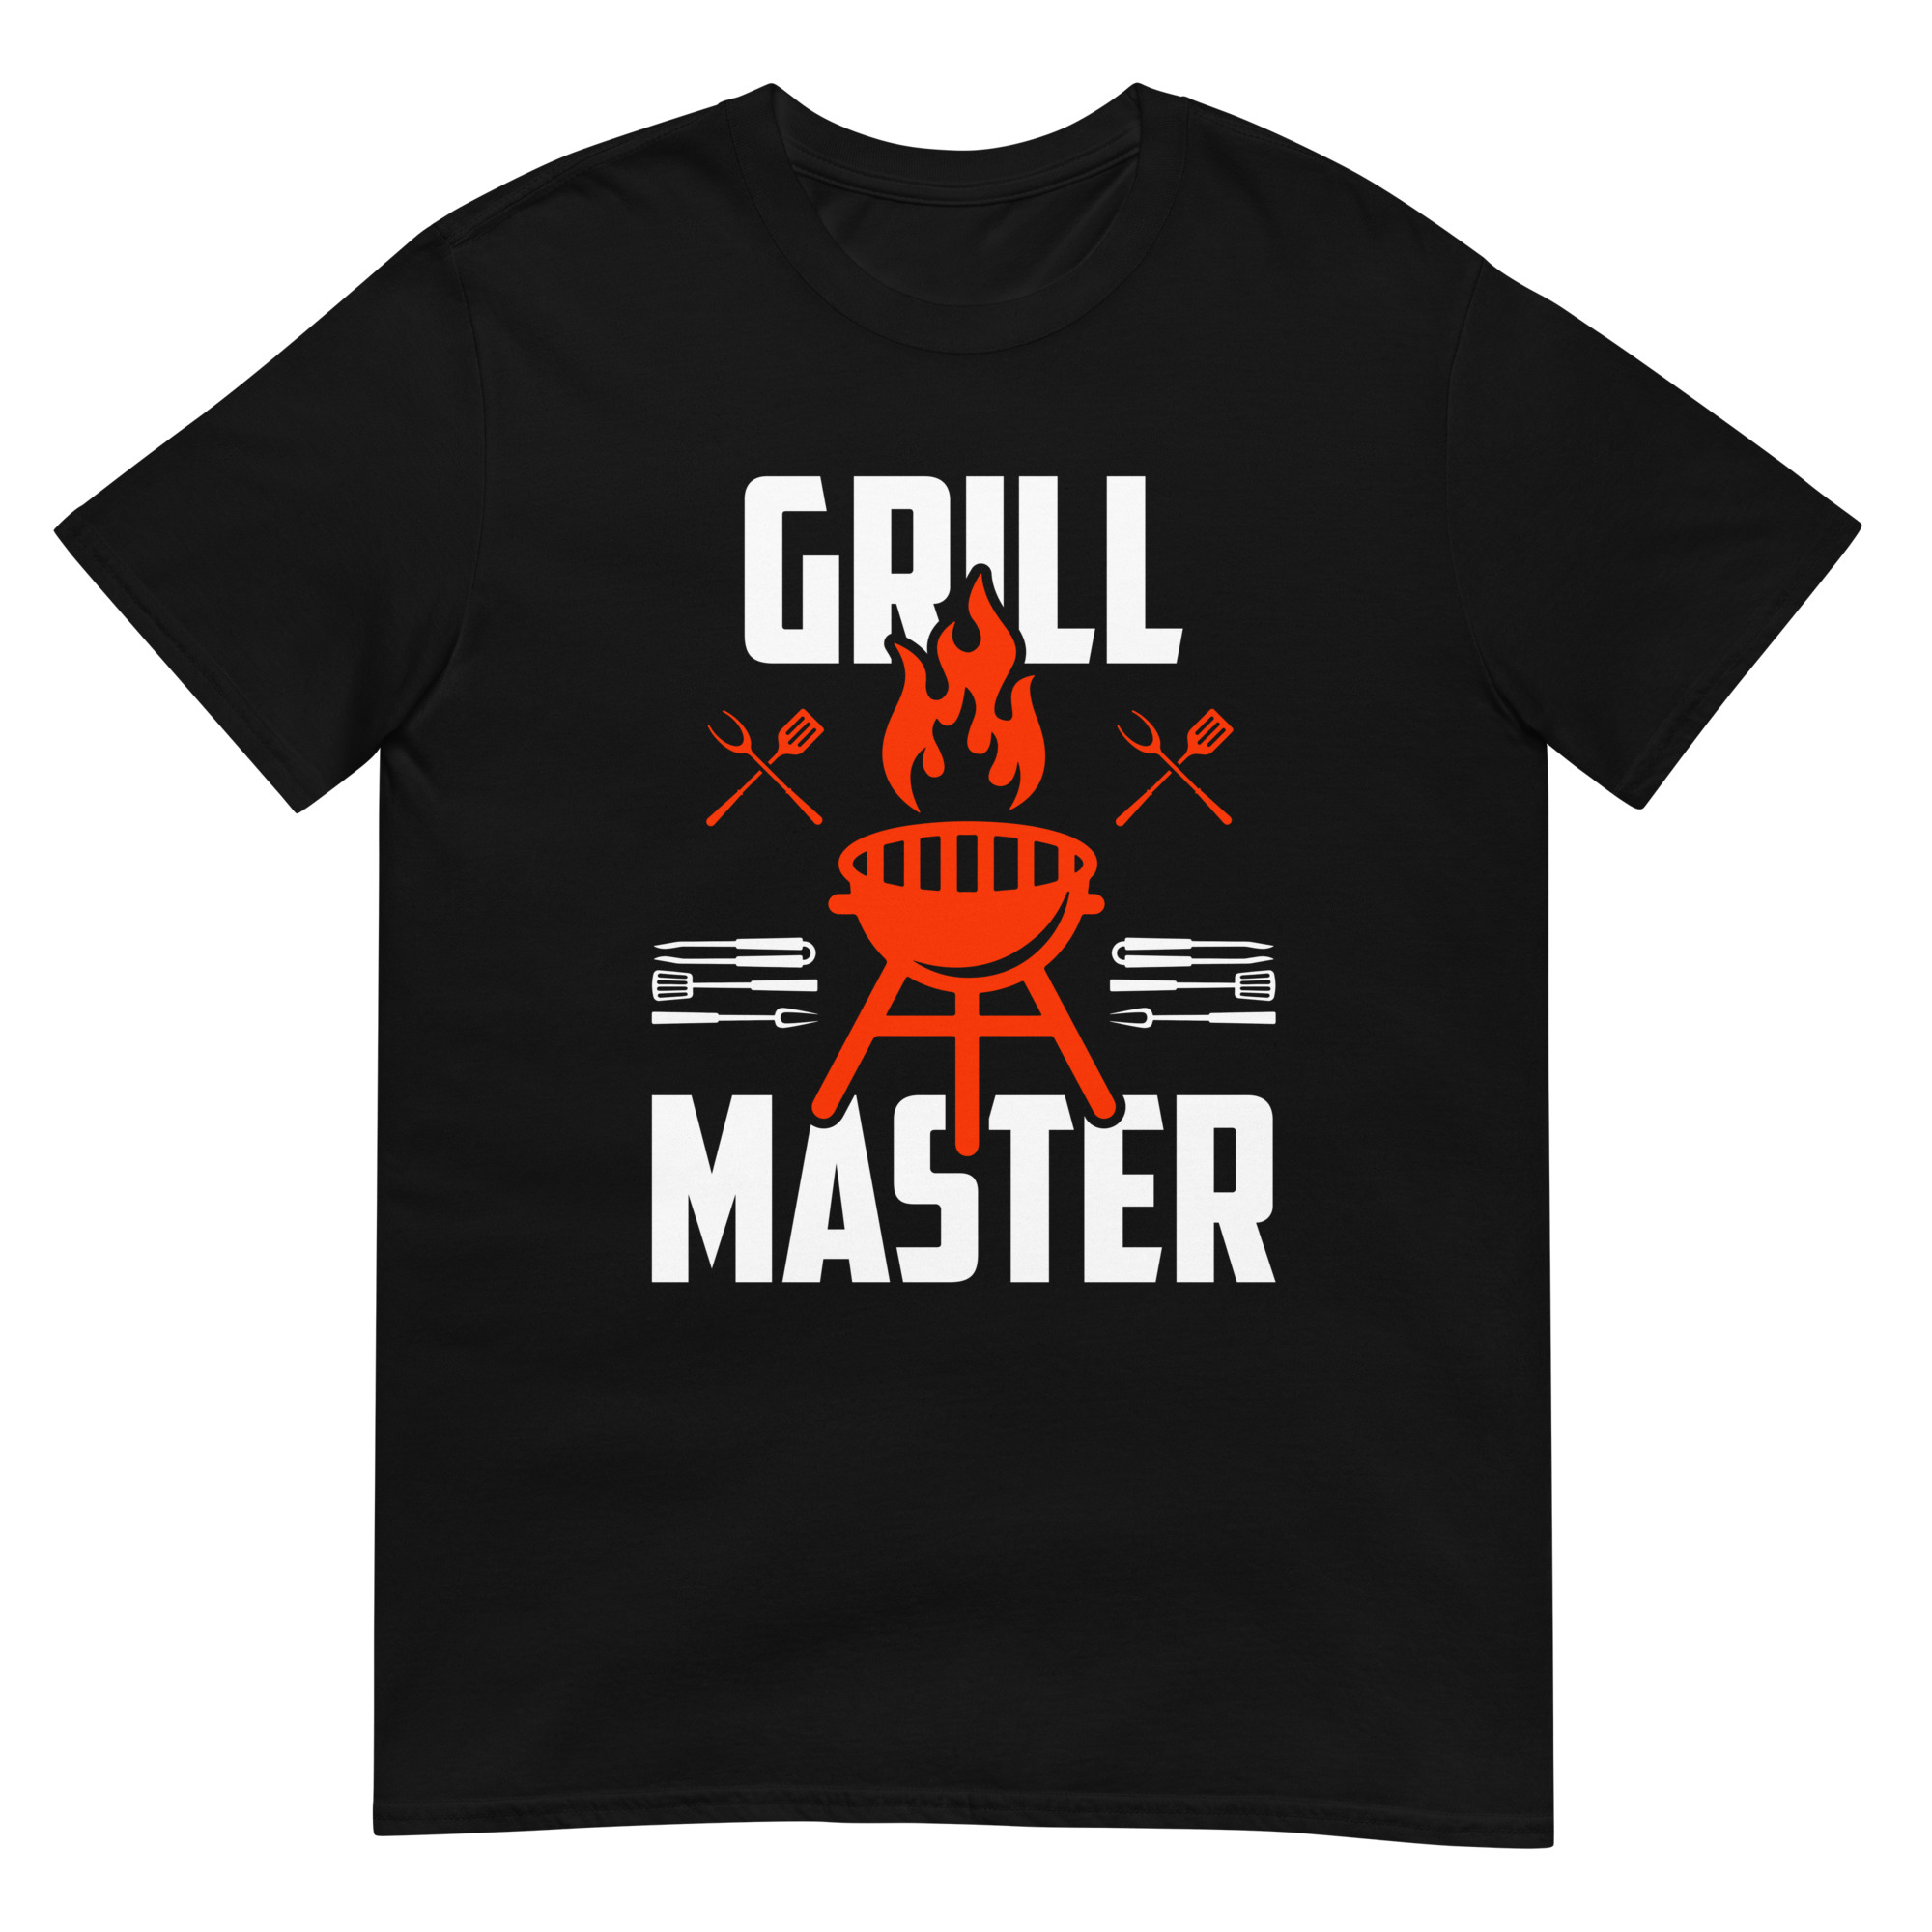 Barbecue Grill Master - Unisex Barbecue T-Shirt